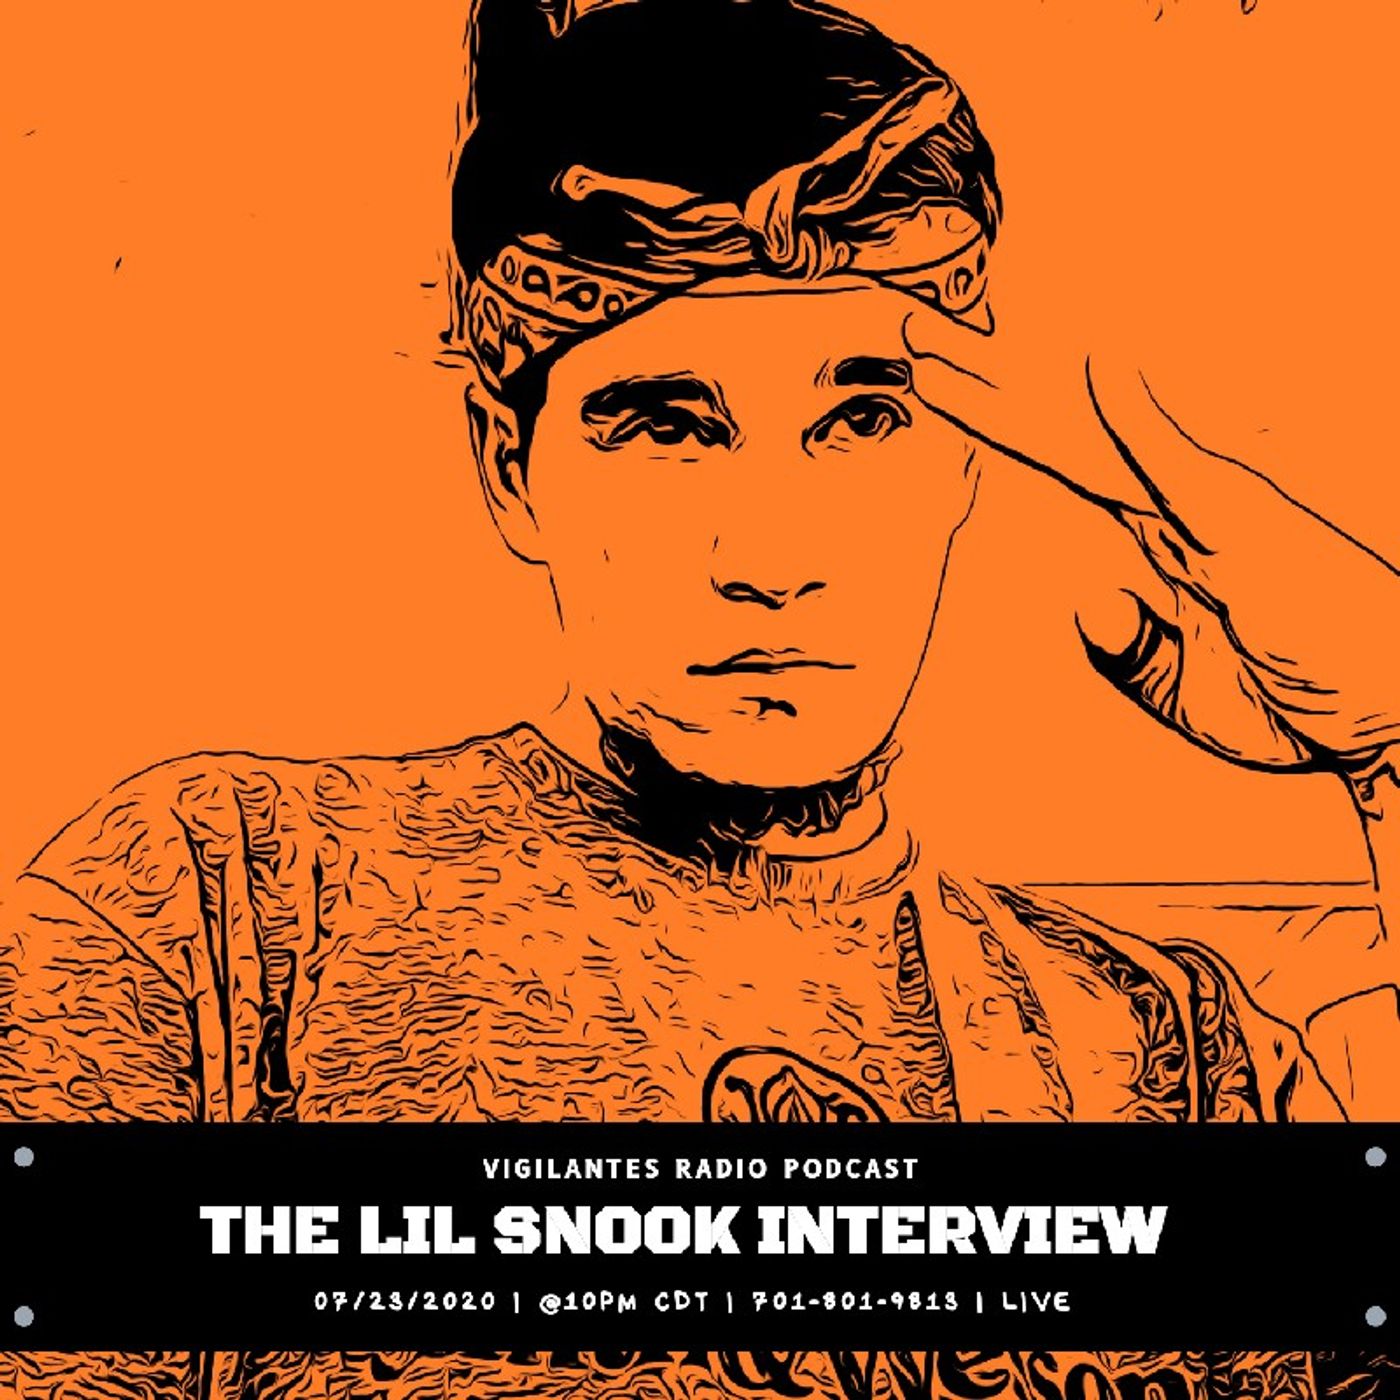 The Lil Snook Interview. Image